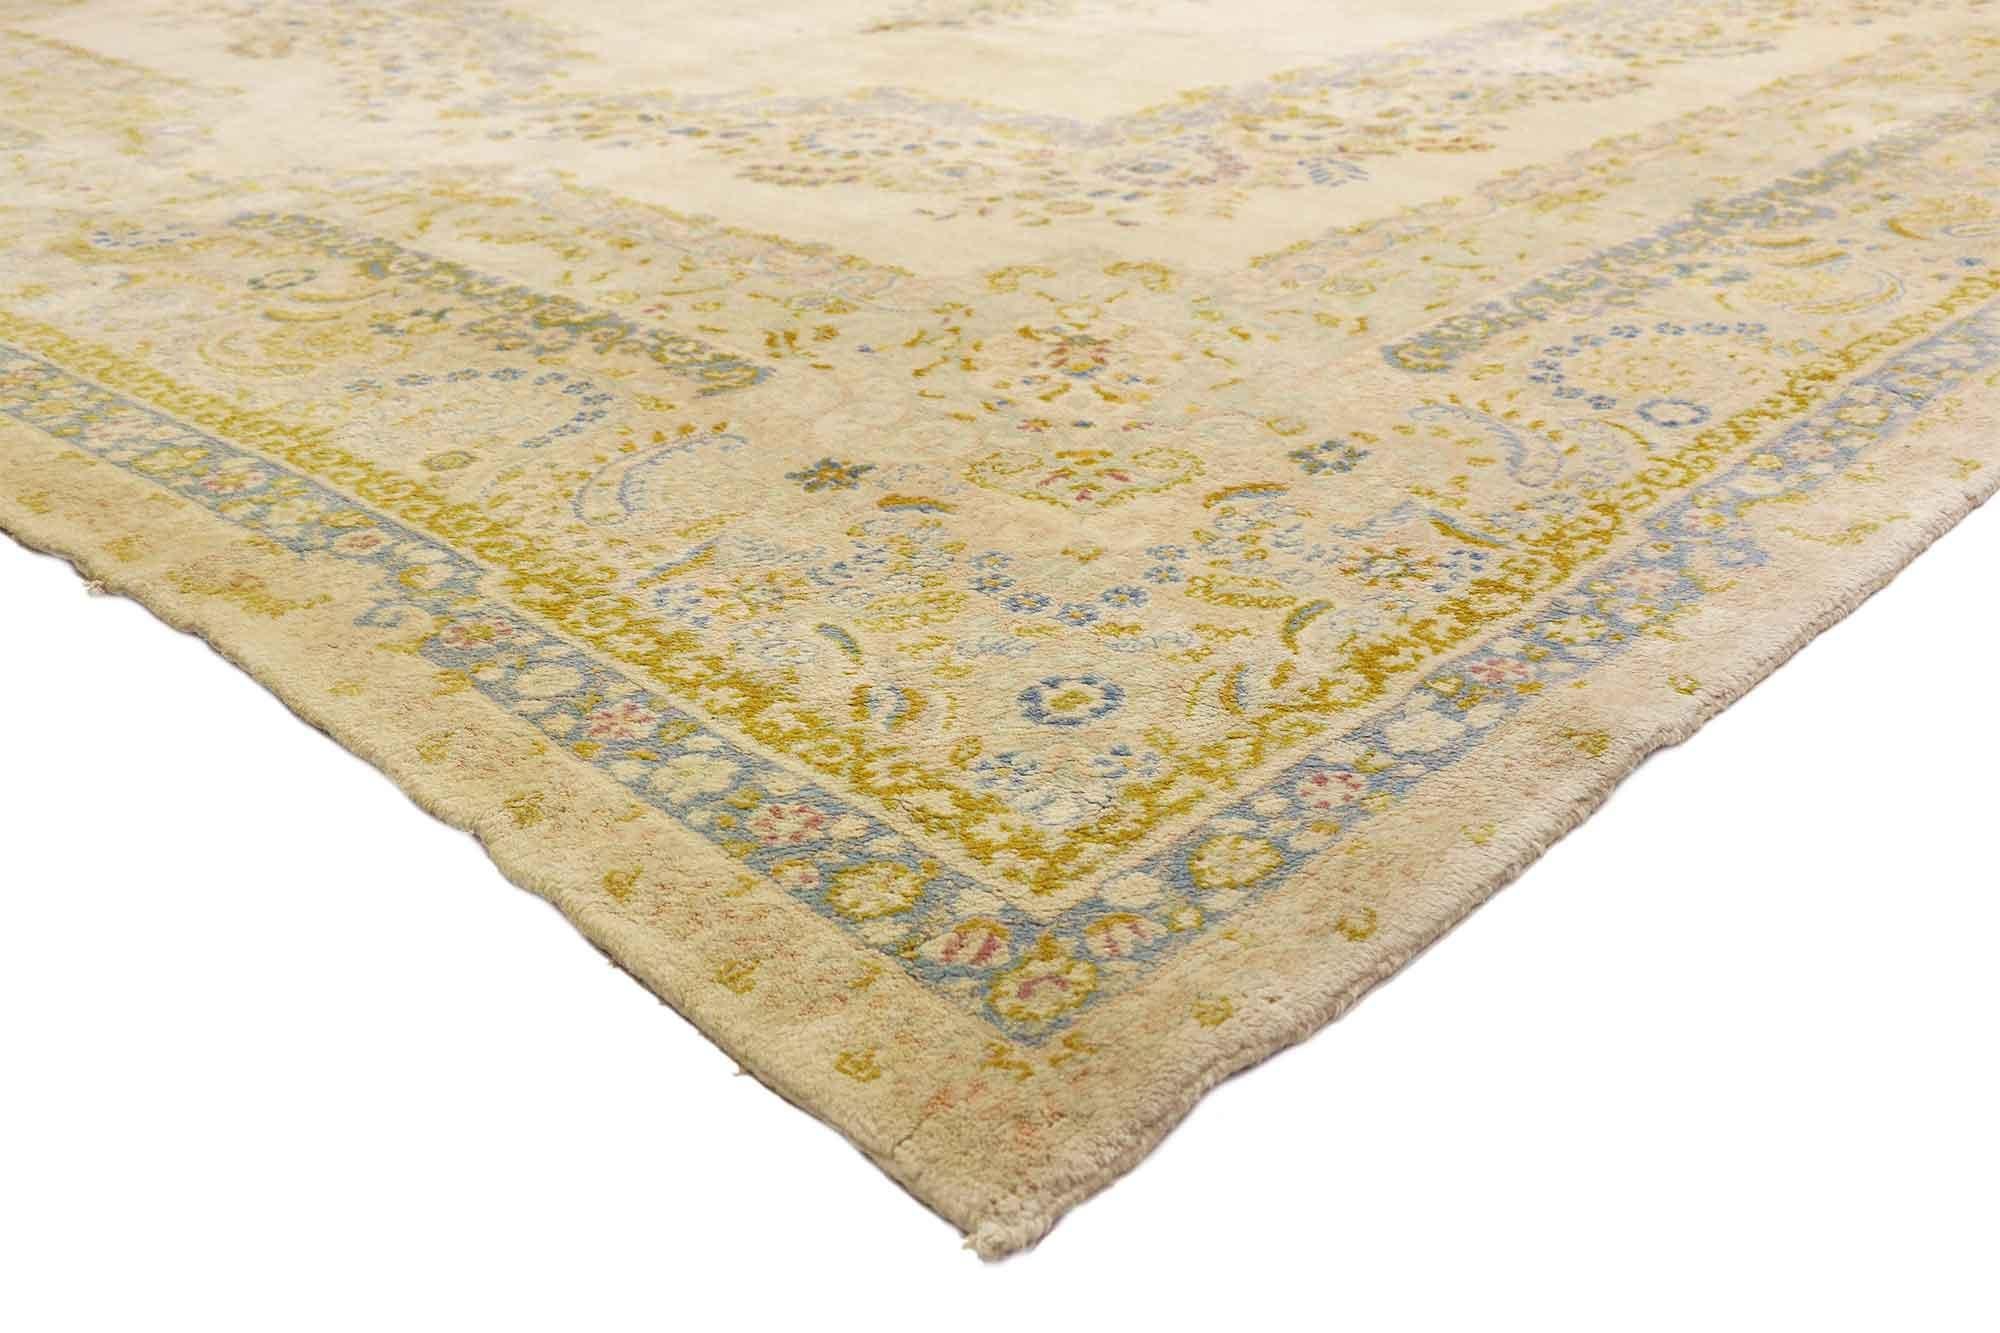 71953 Antique Persian Kerman Rug, 11'05 x 18'07.
Luxe Baroque meets Bridgerton Regencycore ​in this antique Persian Kerman rug. The intricate floral design and soft pastel colors woven into this piece work together cultivating the exquisite delicacy